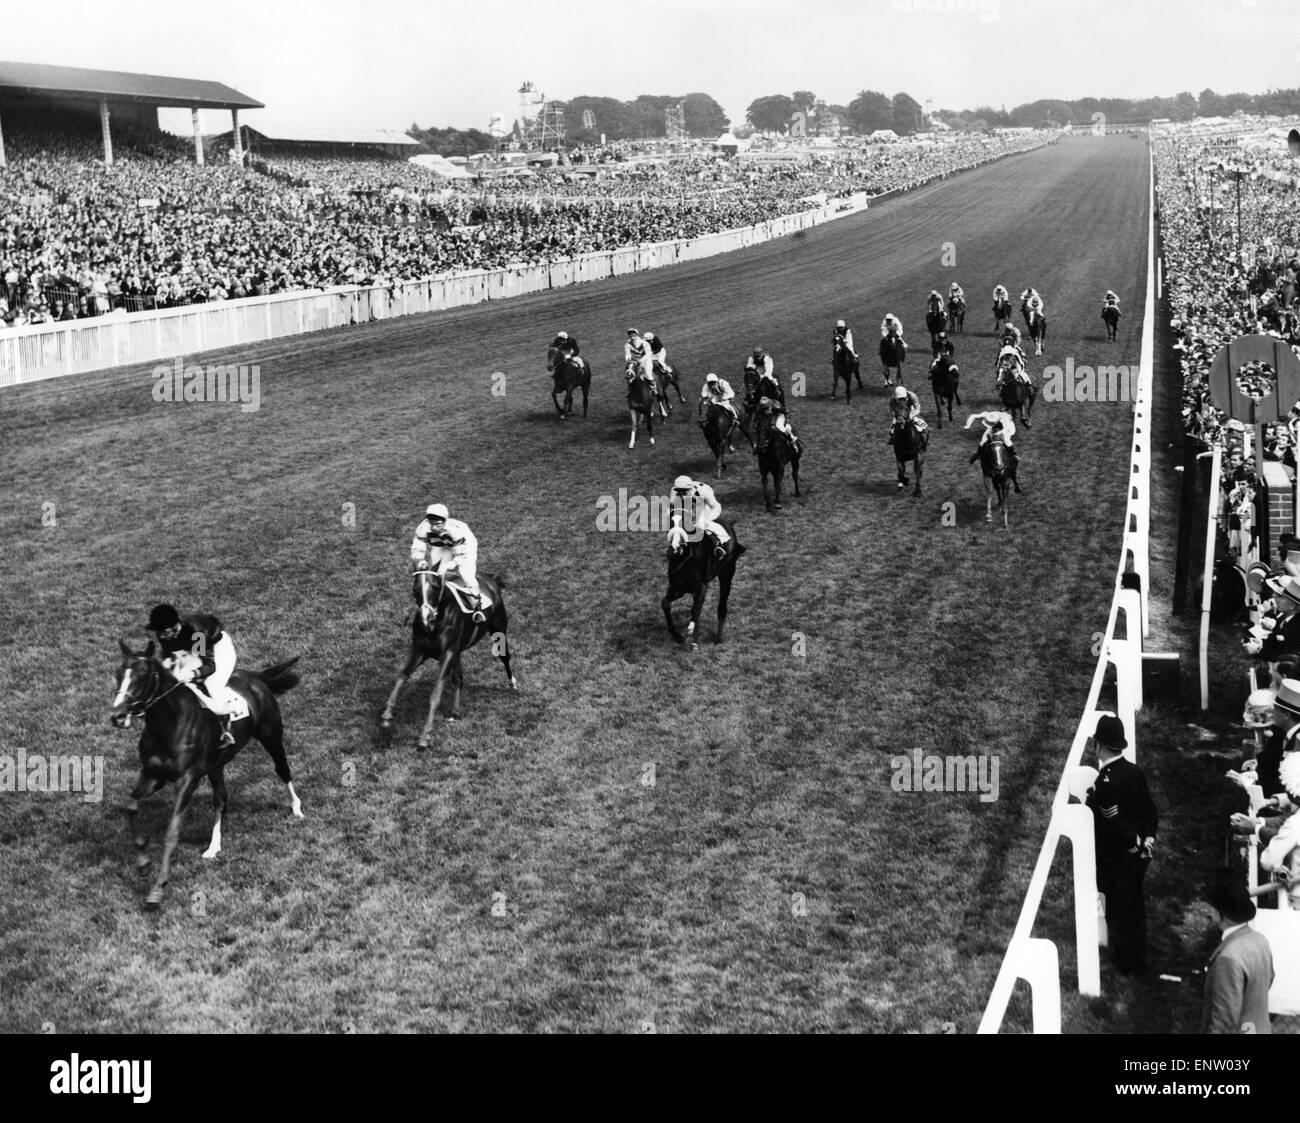 The 1965 Derby was won by the French colt Sea Bird II. The Irish challenger Meadow Court came second two lengths behind the winner- and third was I Say. M. J. Ternynck, the owner of Sea Bird II will receive a prize of £65,301. Meadow Court wins £7,506 and I Say £3,653. Sea Bird II passes the winning post followed by Meadow Court and I Say. June 1965 Stock Photo